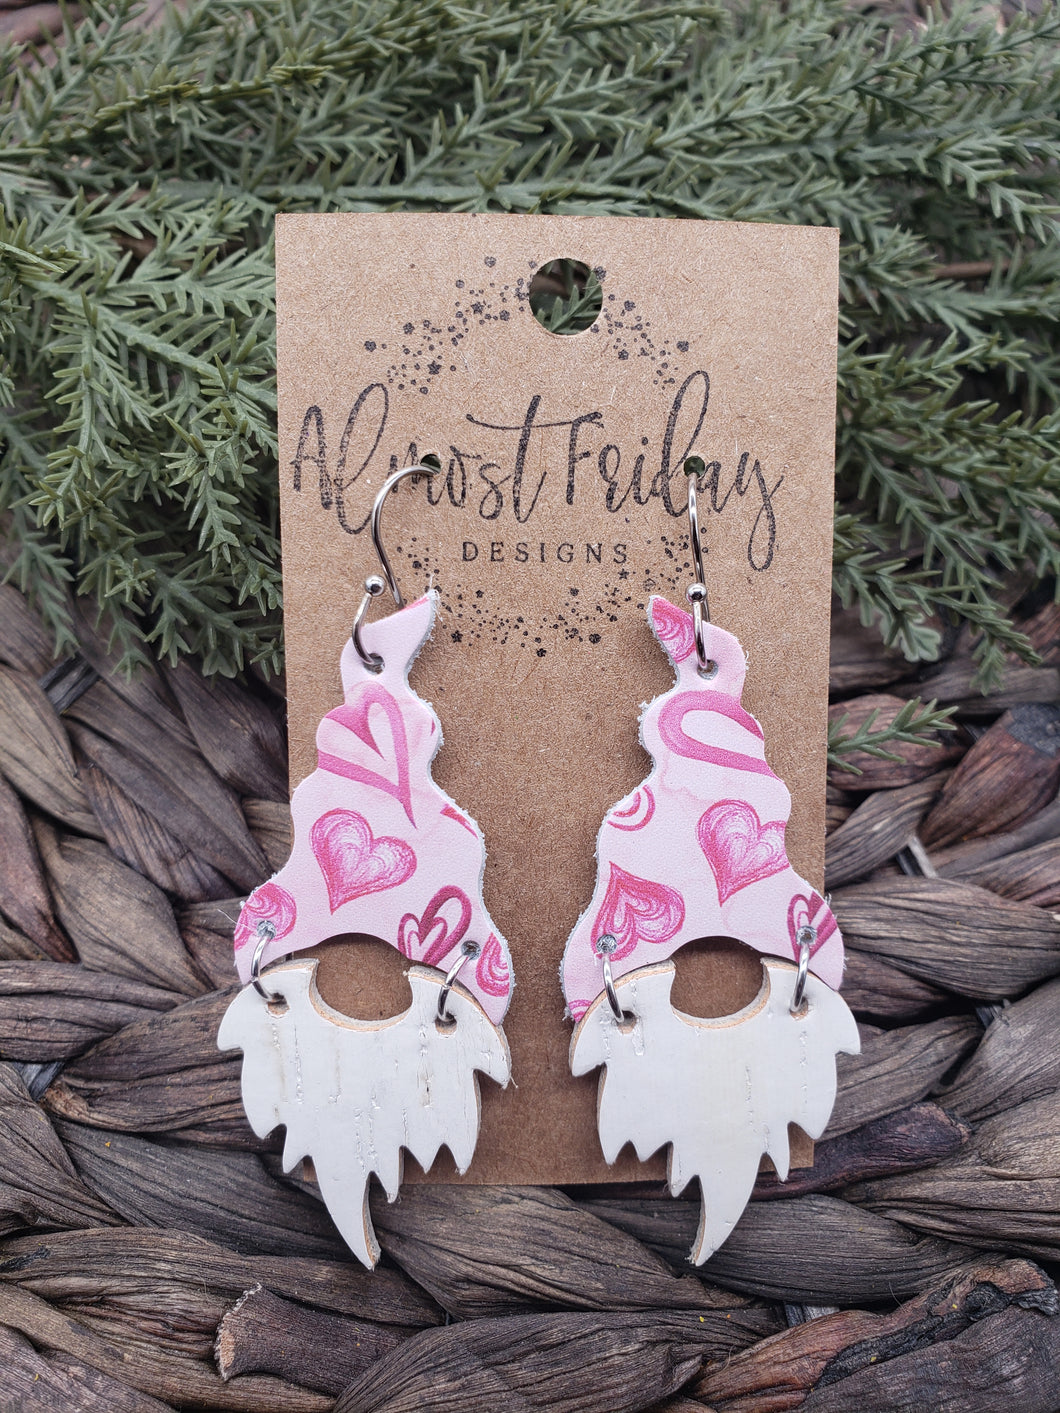 Genuine Leather Earrings - Valentine's Day Earrings - Gnome - Winter - Cut Out Earrings - Pink - White - Hearts - Statement Earrings